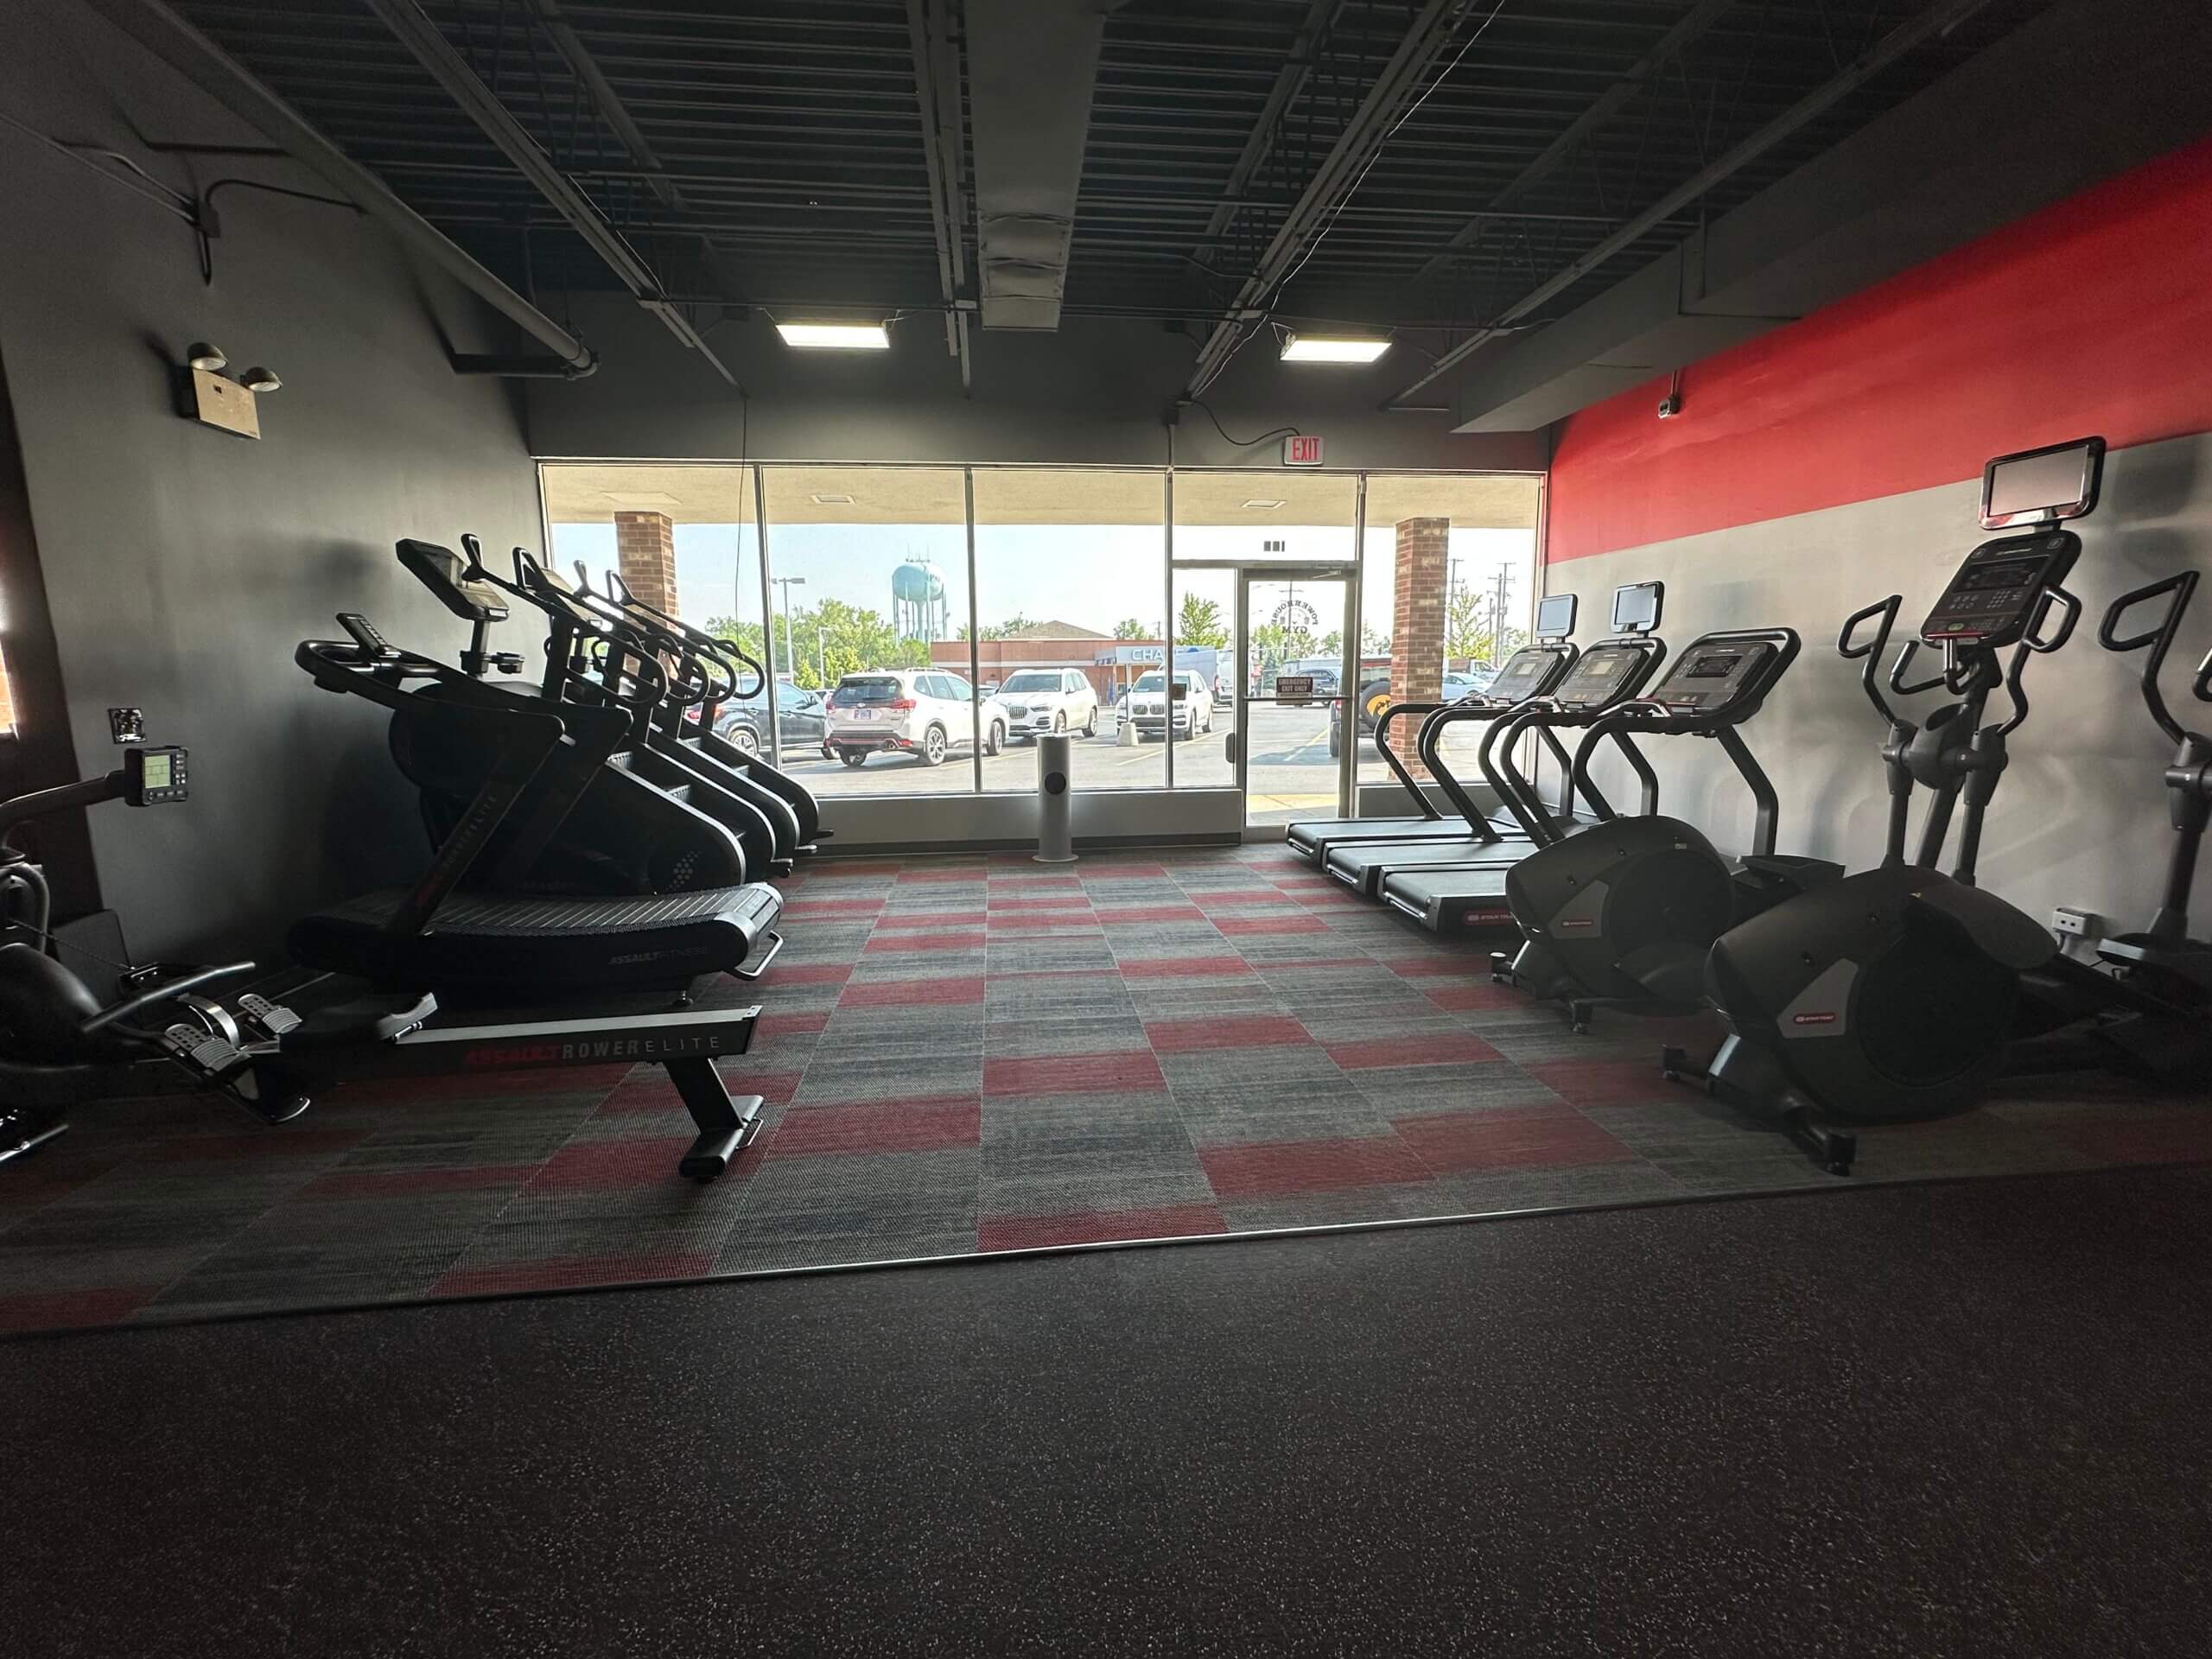 An Thumbnail Image of the Palatine, IL Powerhouse Gym Location